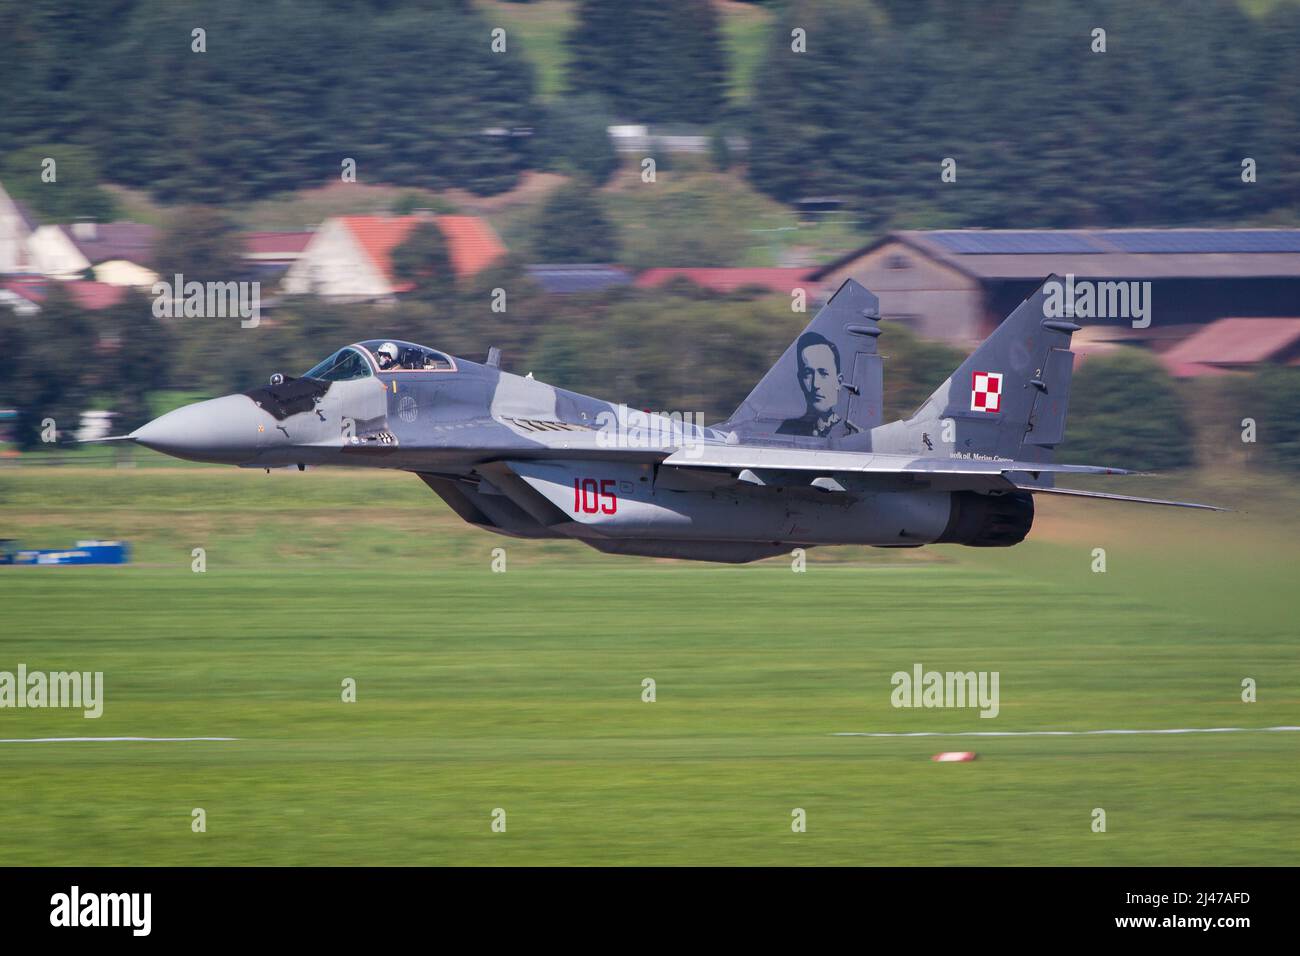 Polish Air Force Mig 29 fighter jet from Poland taking off with full afterburner to a mission Stock Photo